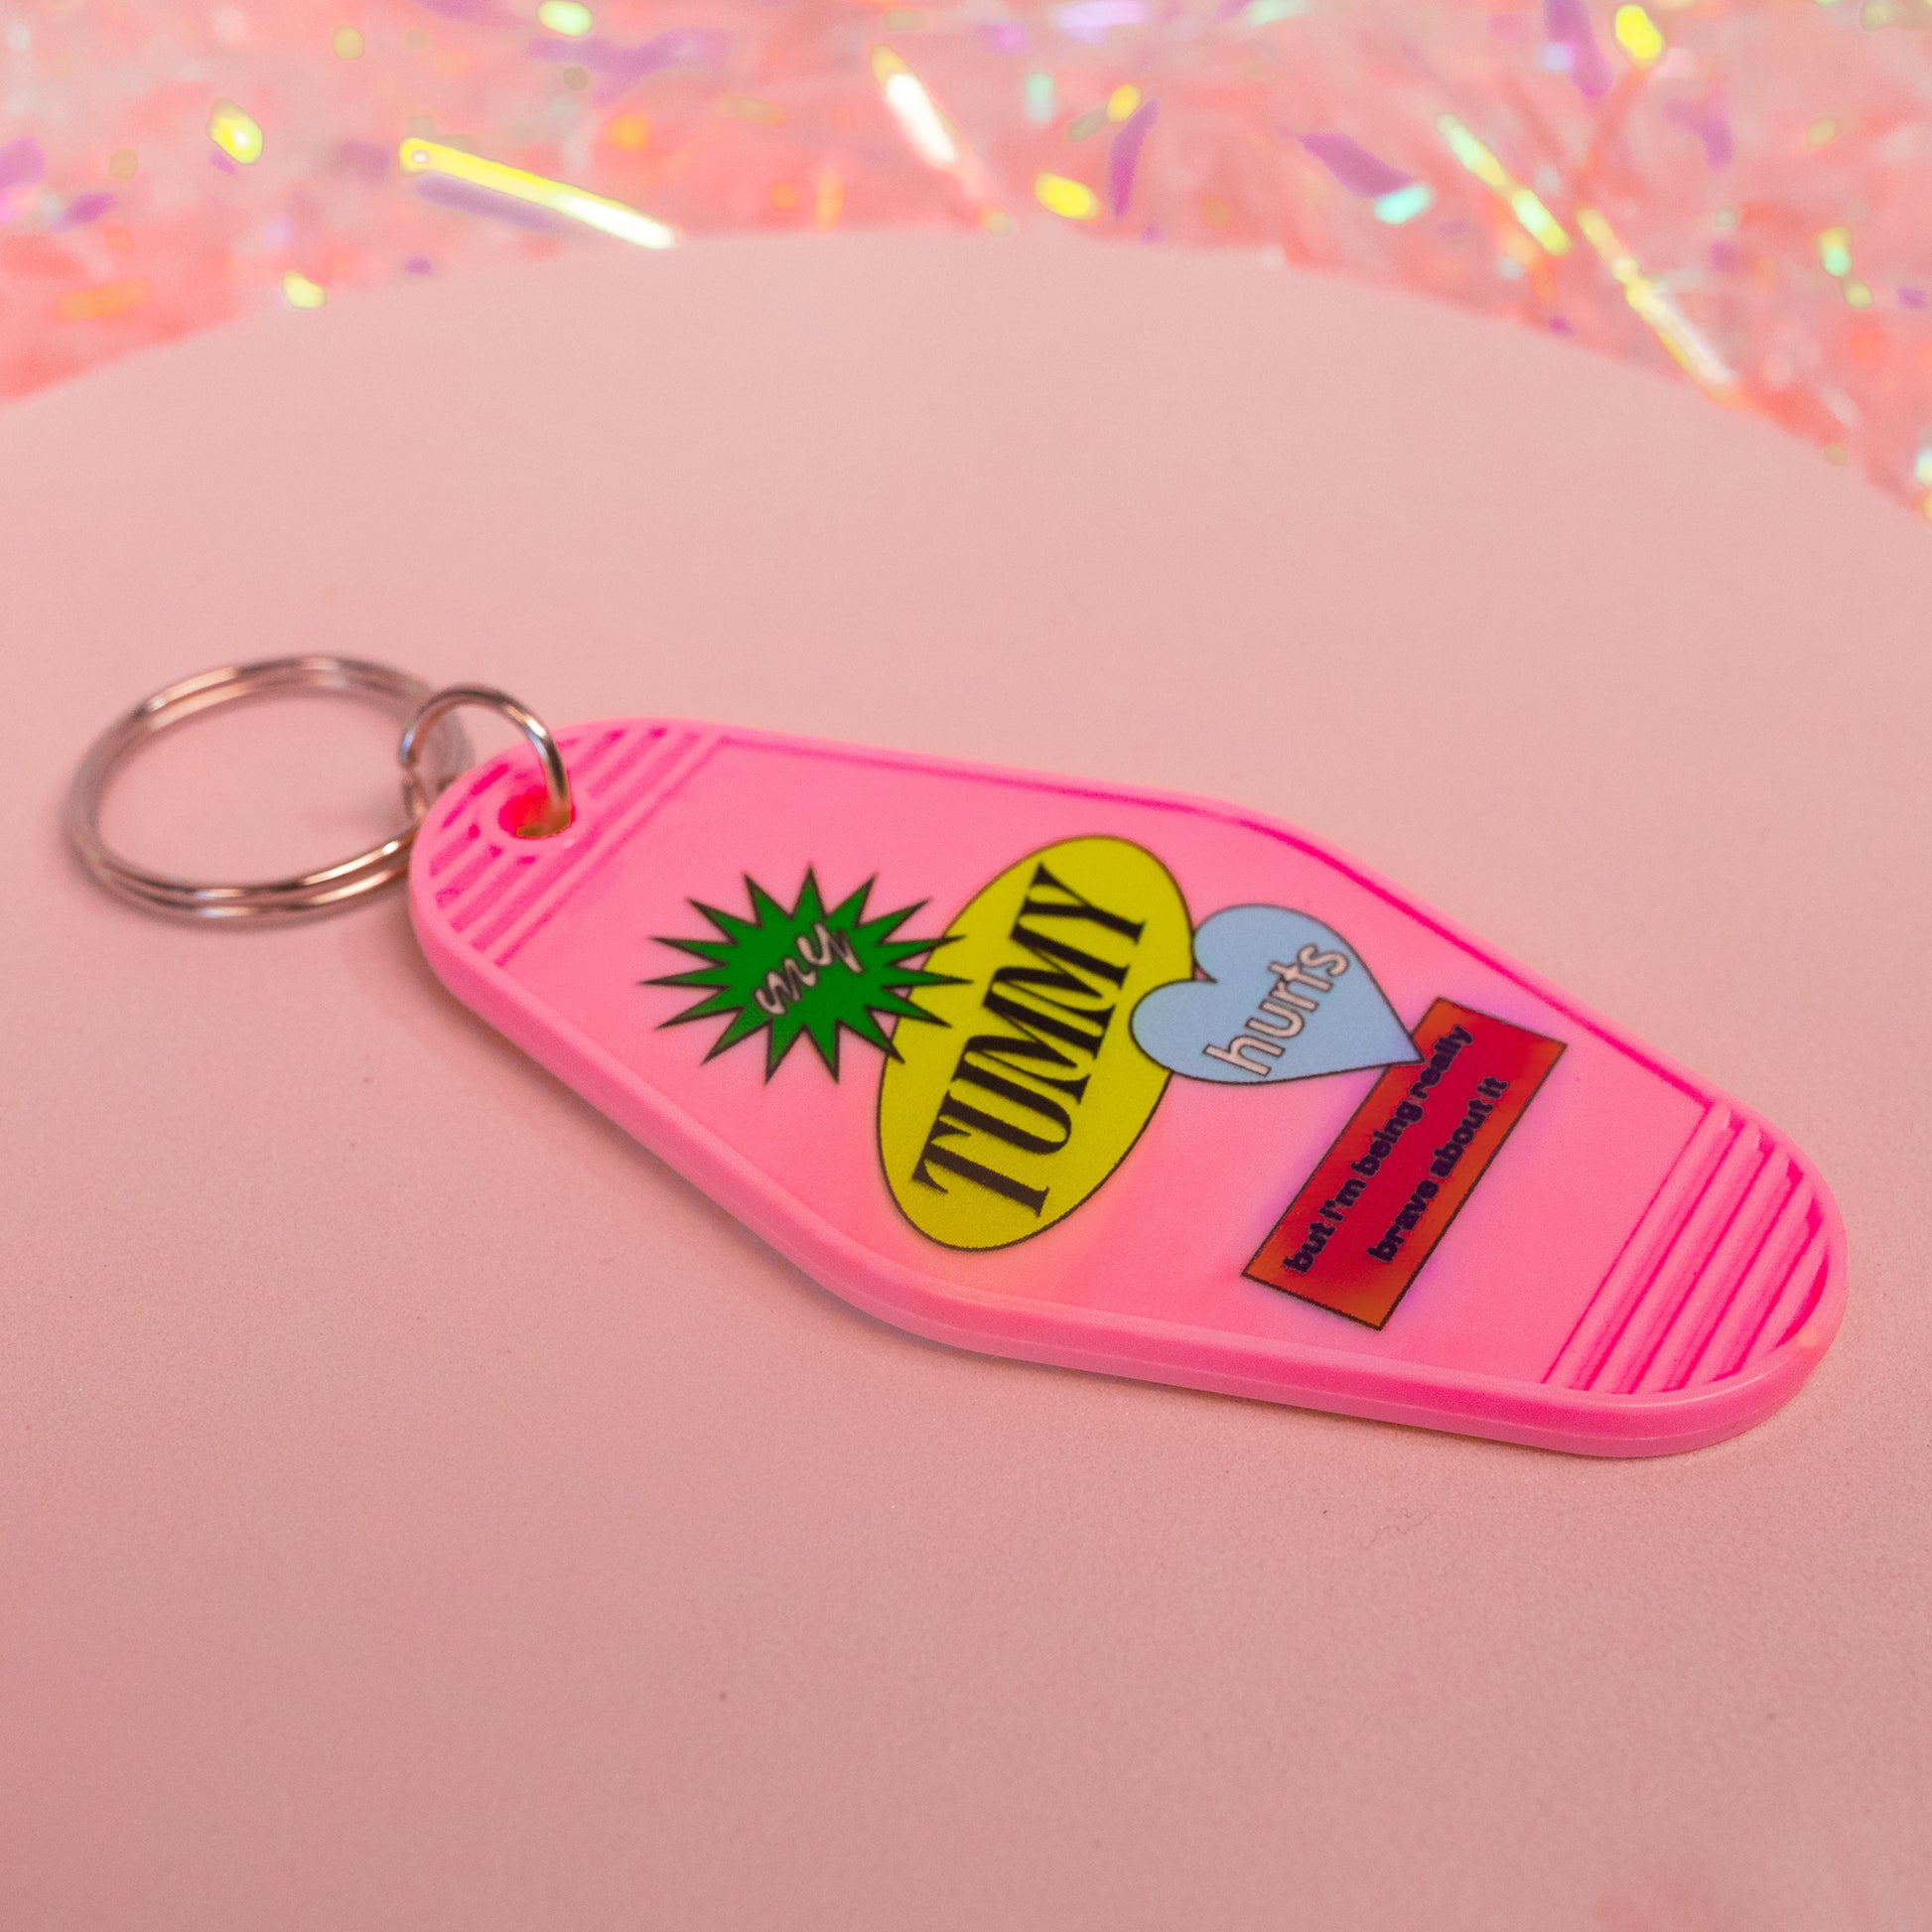 pink with colorful shapes keychain